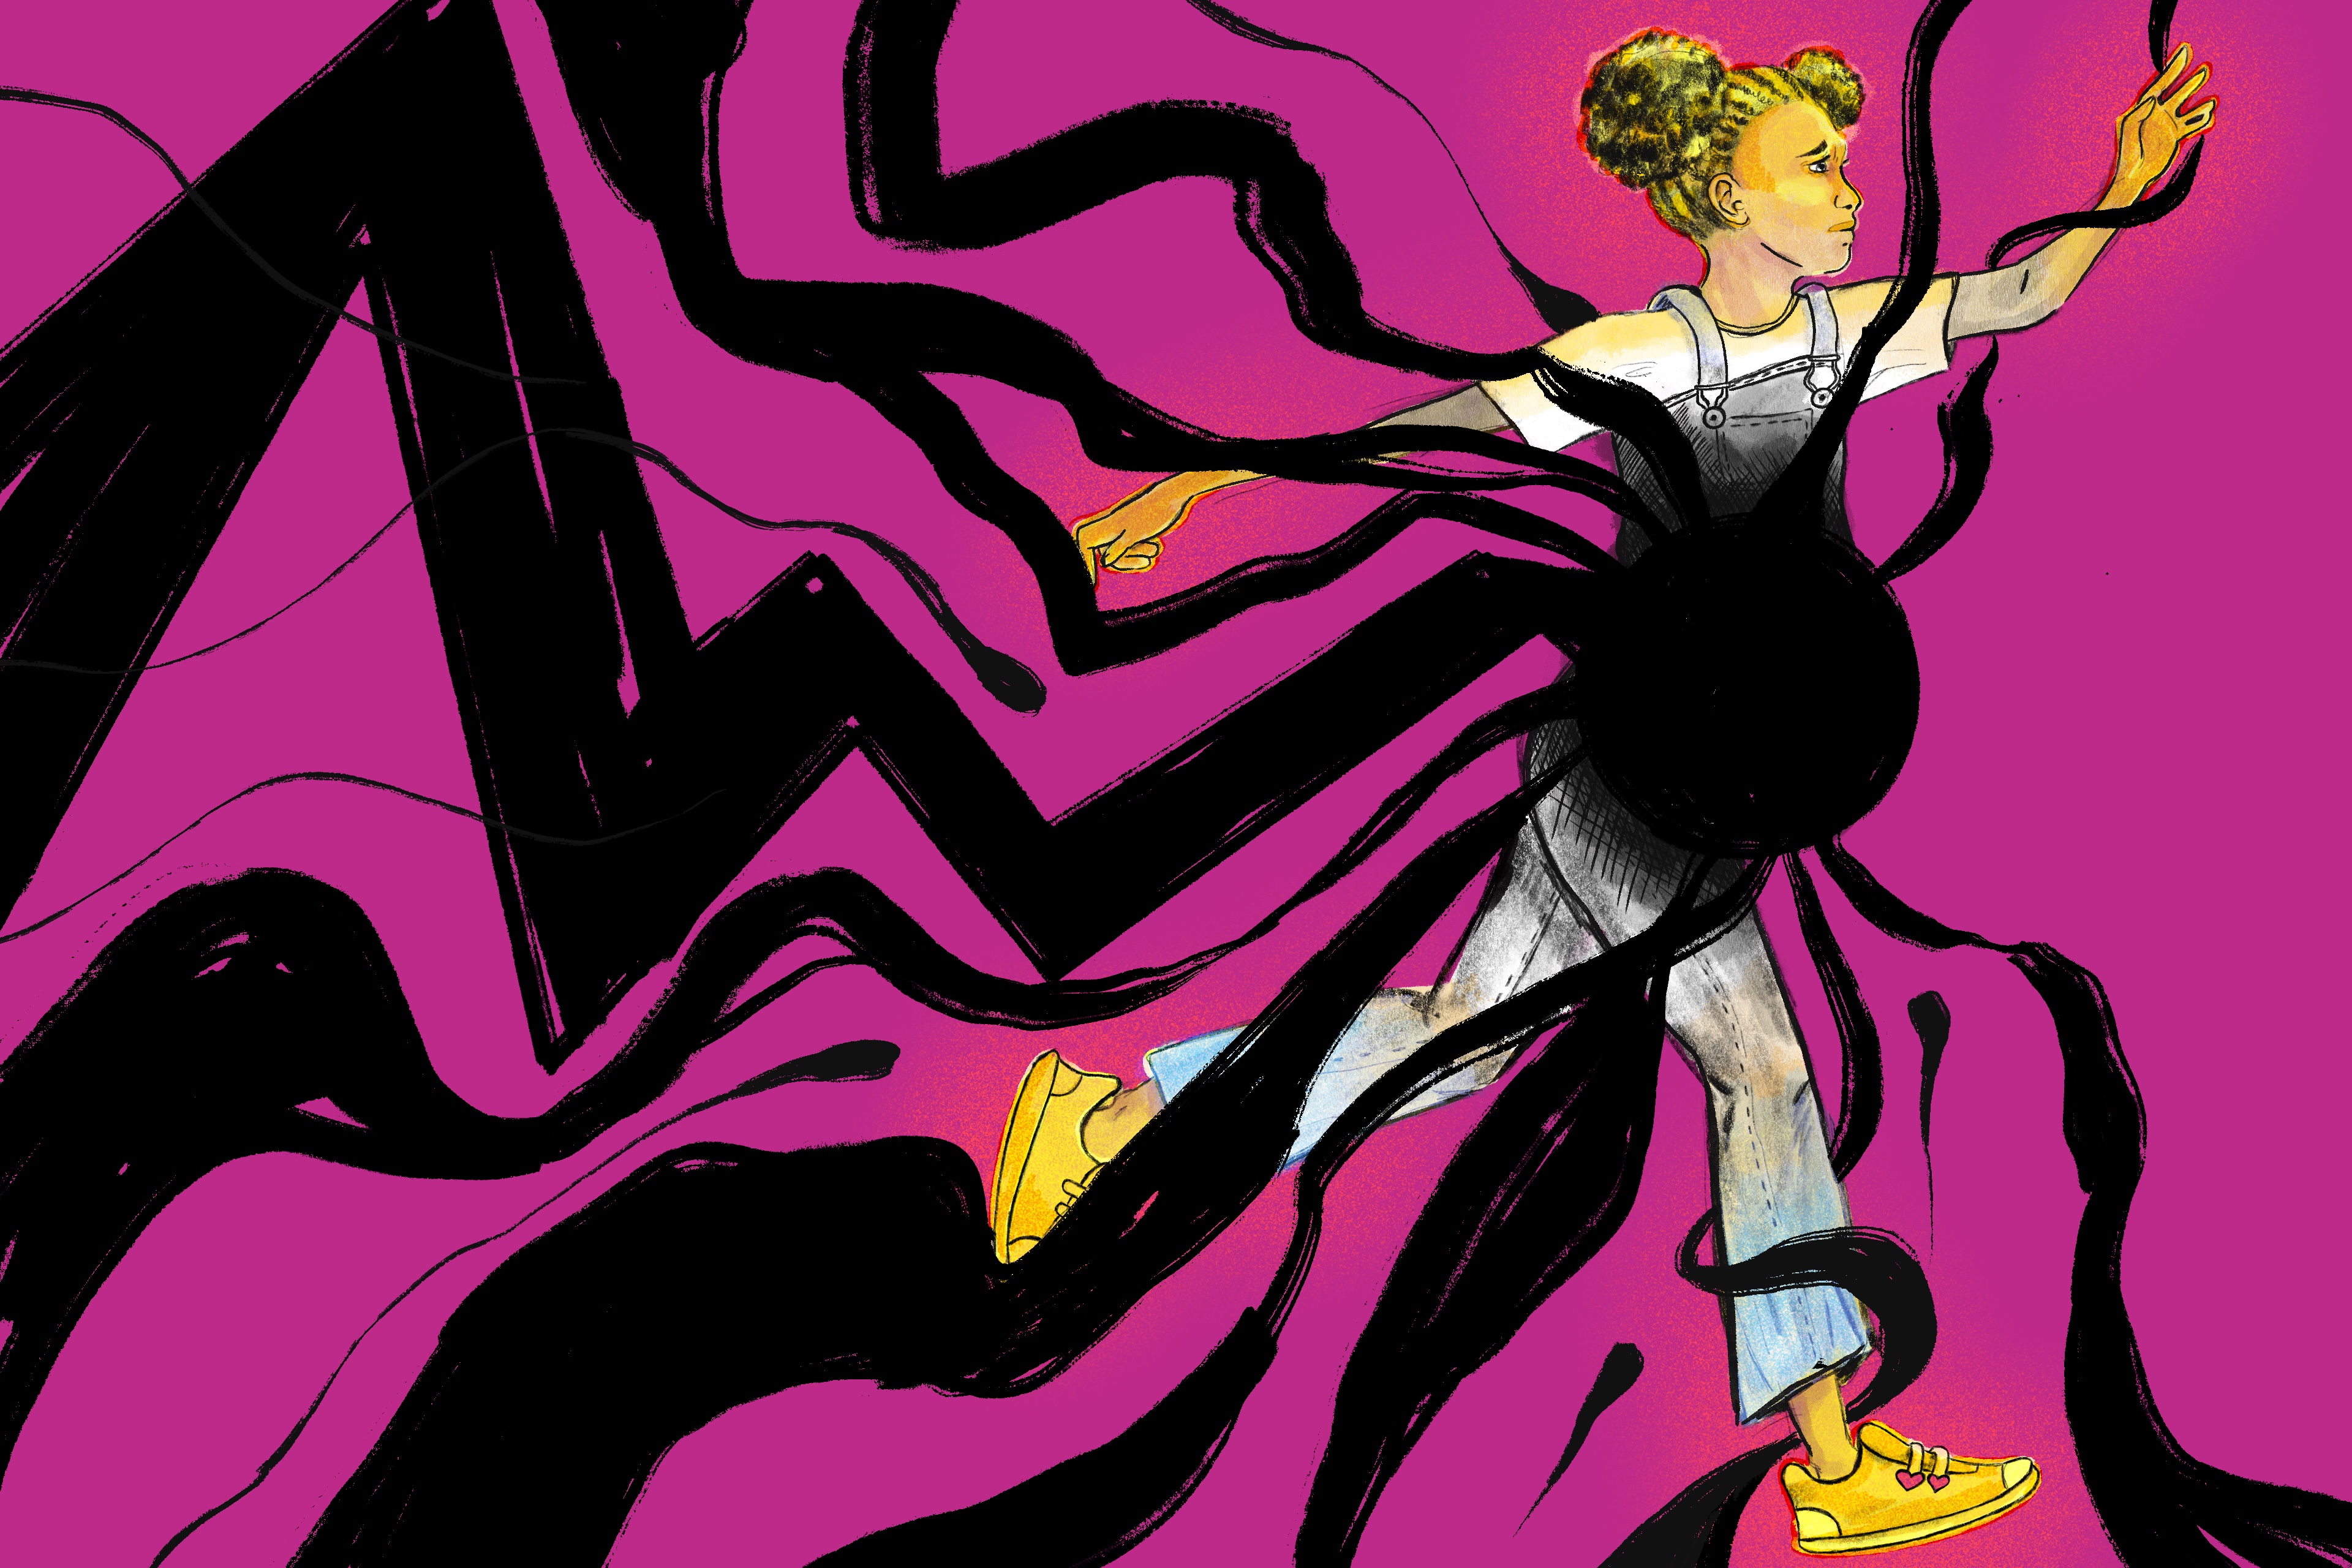 A digital illustration depicting a teen girl running fear fully. She is drawn in black-and-white pencil against a solid magenta-pink background. Black ink lines chase and swirl around her, and come to concentrate as a circle over her stomach, depicting a pregnancy. The theme is an inescapable situation and loss of child/personhood.